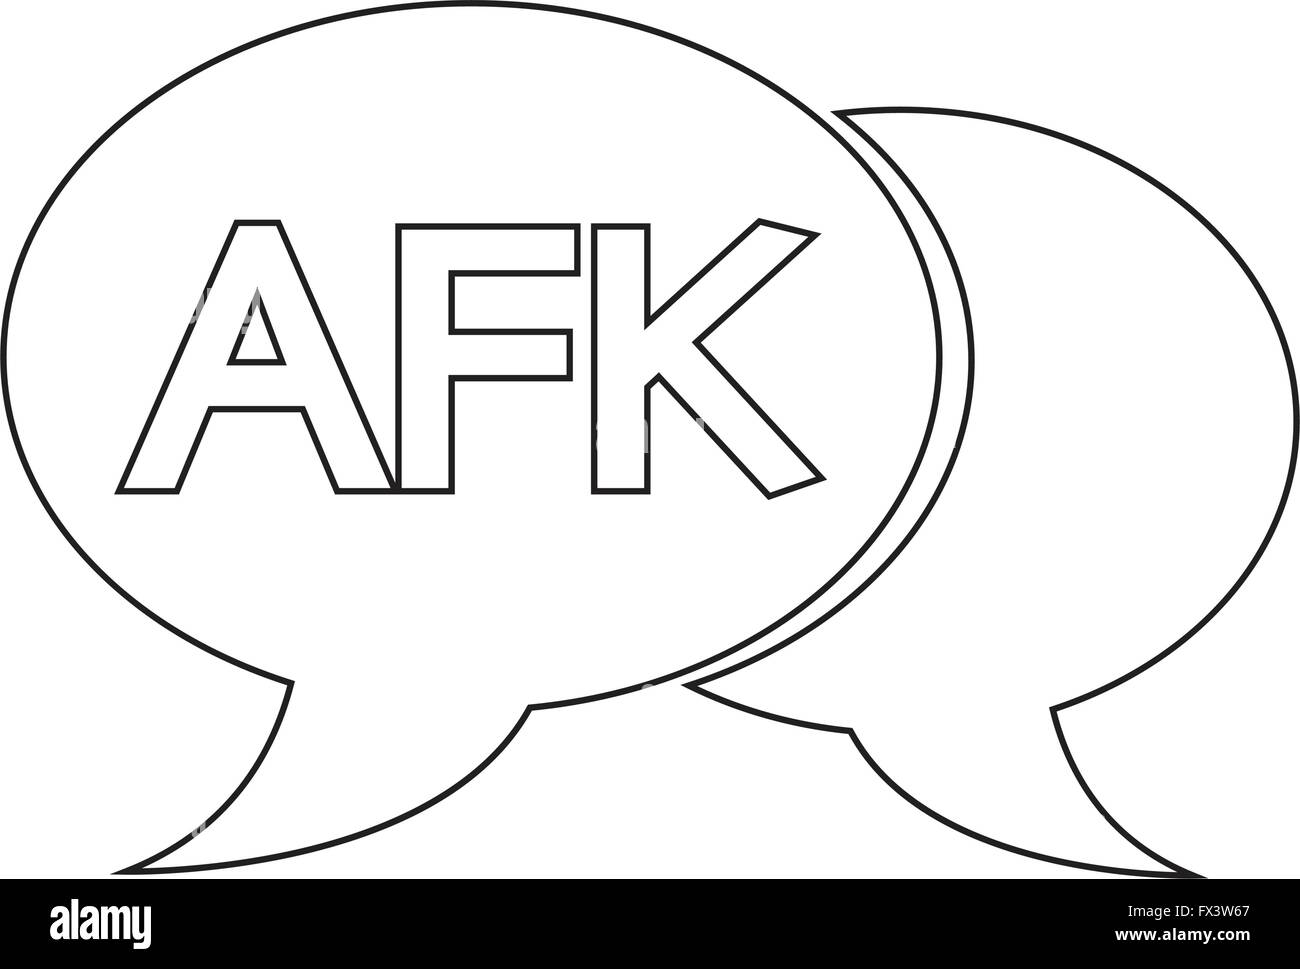 AFK internet acronym chat bubble illustration Stock Vector